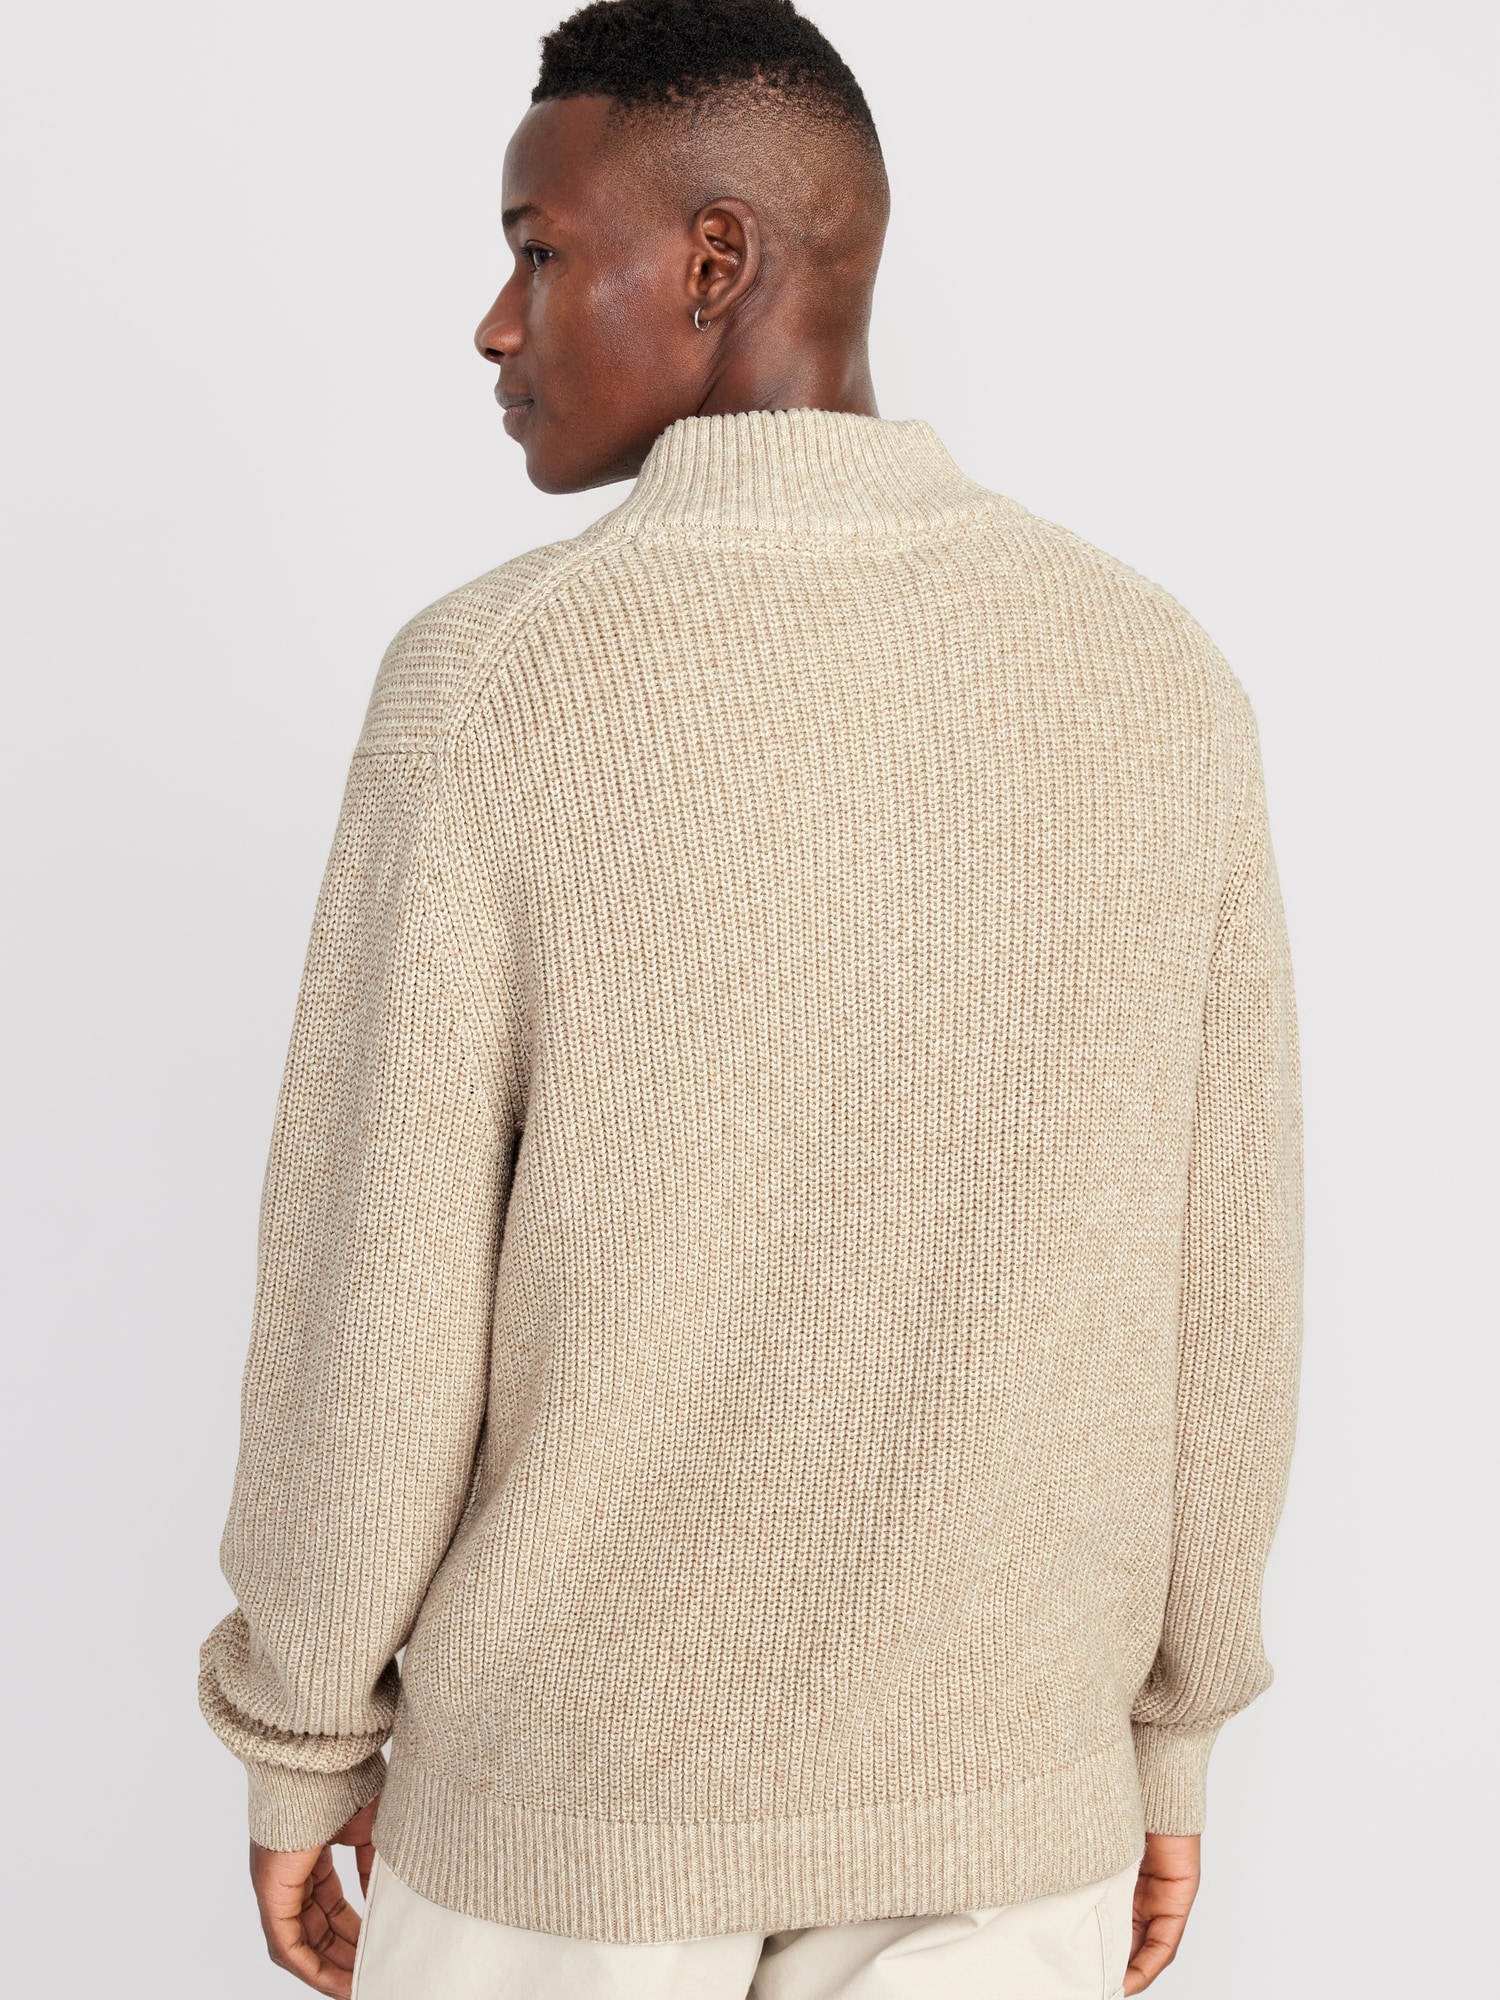 Ribbed knit sweater - Men